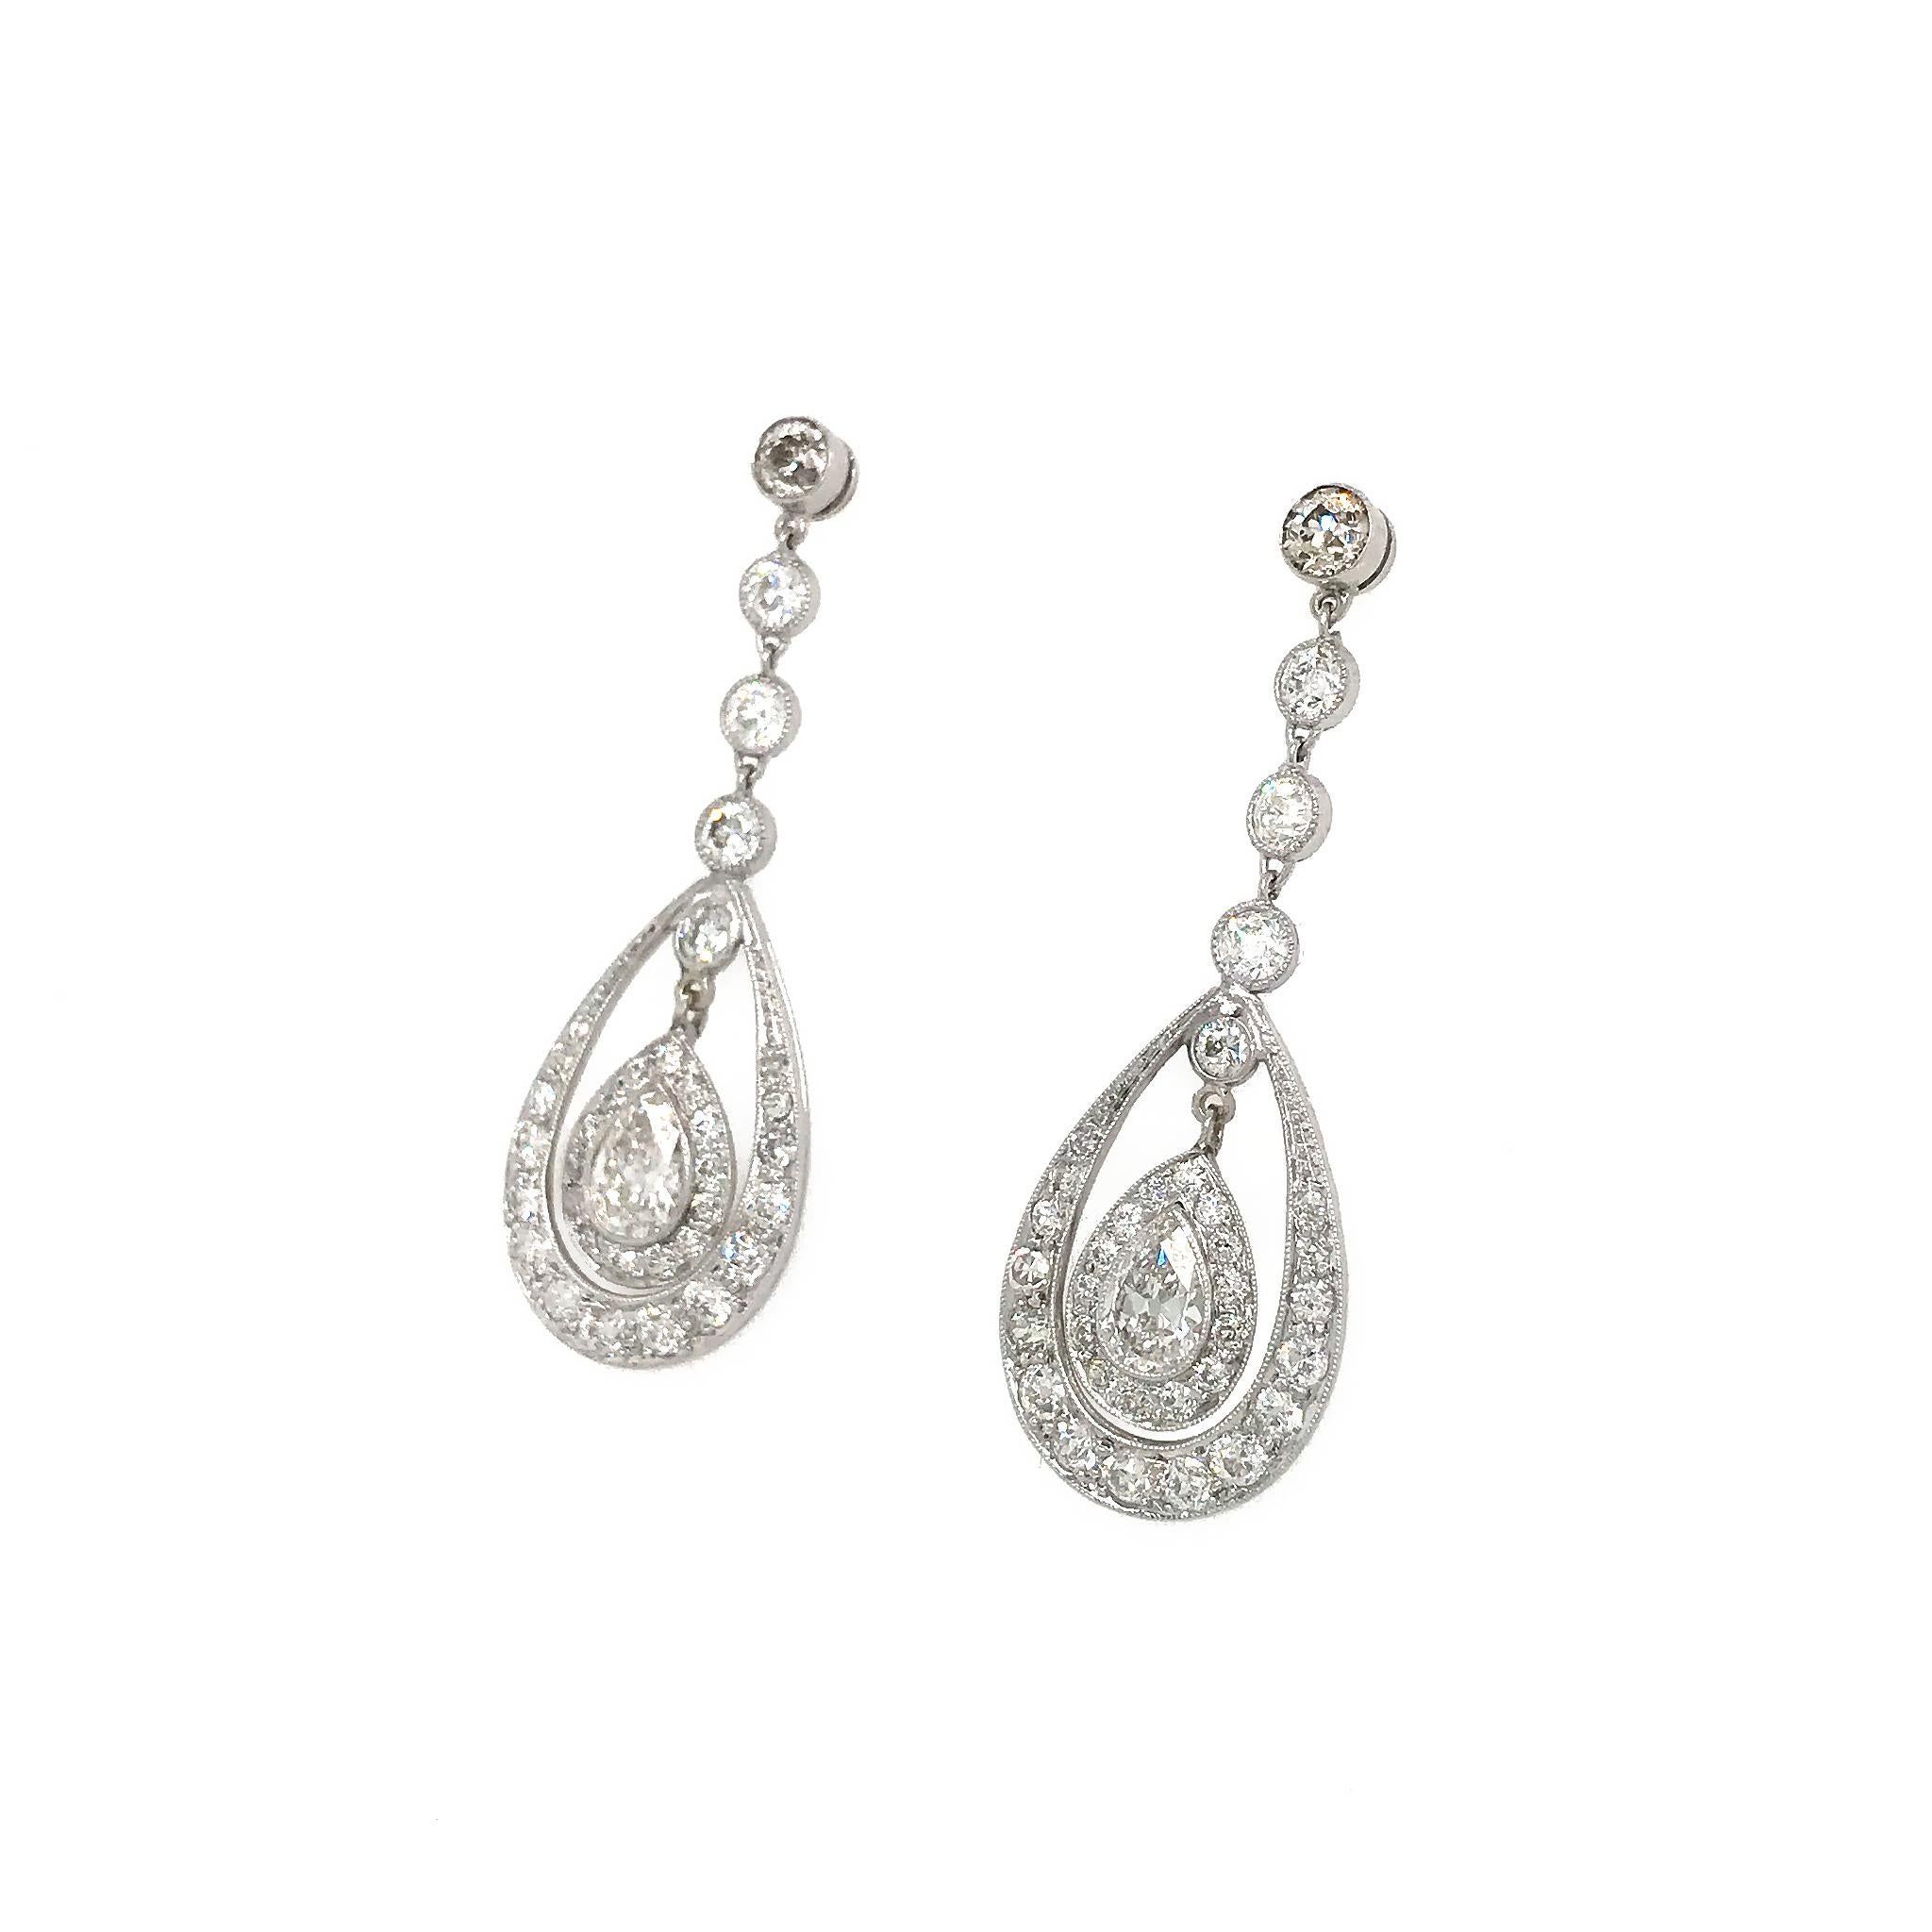 The movement and style of these earrings show off their charm and beauty.
Platinum
Diamond: 3.0ct twd (estimated)
Center Pear shapes (est) wt. .50 carats each
Earrings Length: 1.60 inches
Total Weight: 6.2 grams
F- Color VS-Clarity